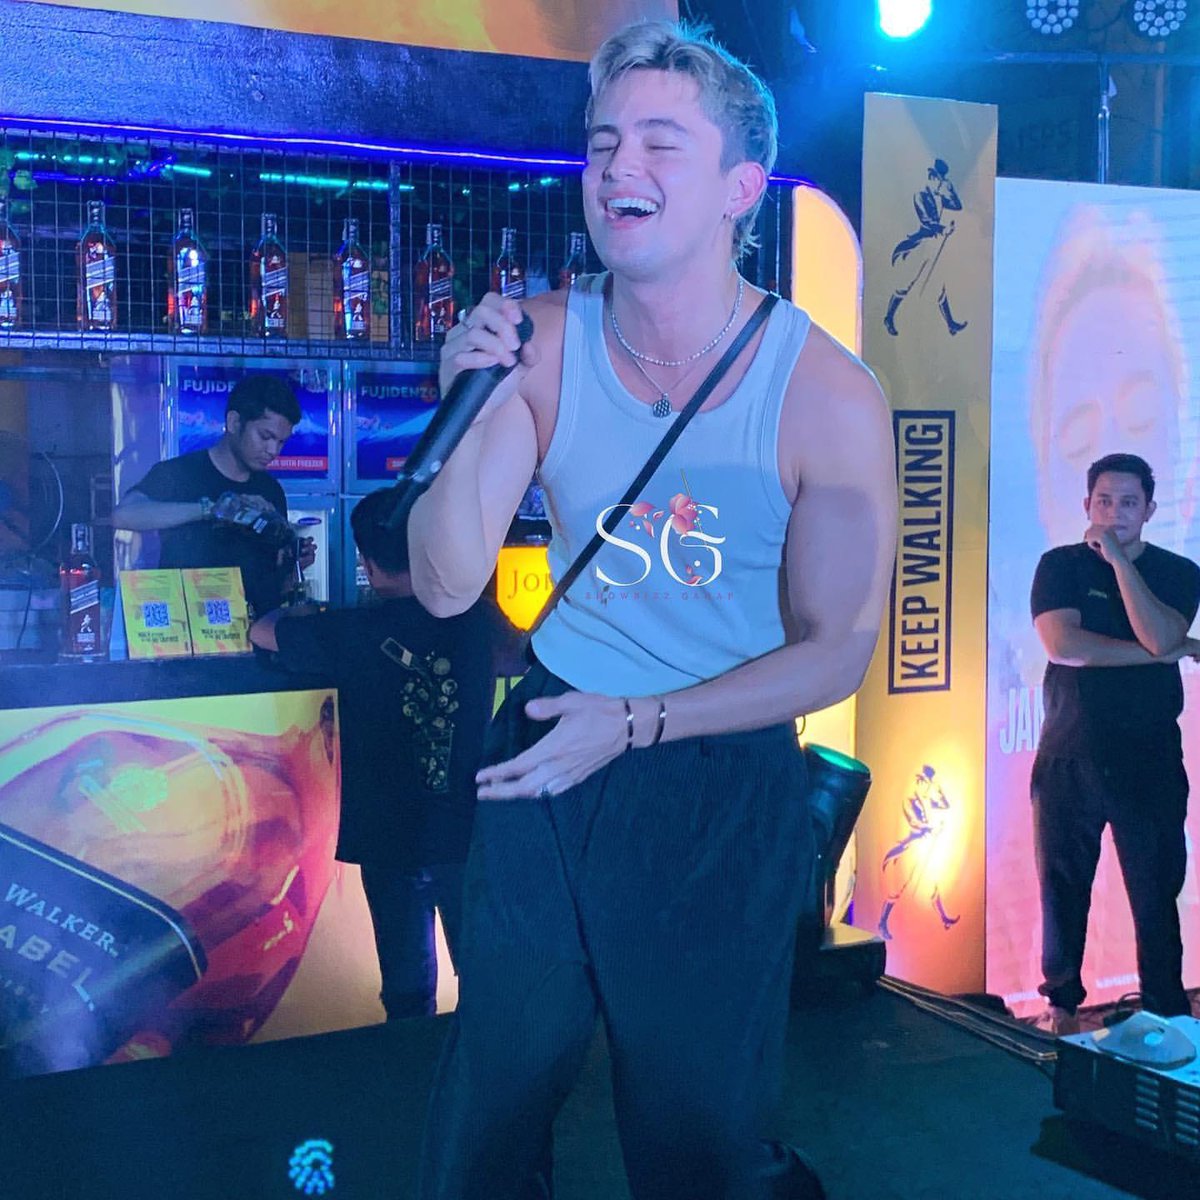 @tellemjaye performing some of his songs at Last Leg of the So Fire Bar Tour in partnership with @johnniewalkerph ❤️ #ShowbizzGanap2023 #ShowbizzGanap #JamesReid
©️showbizzganap (6/1/23)

JAMES REID x JOHNNIE WALKER #KEEPWALKING